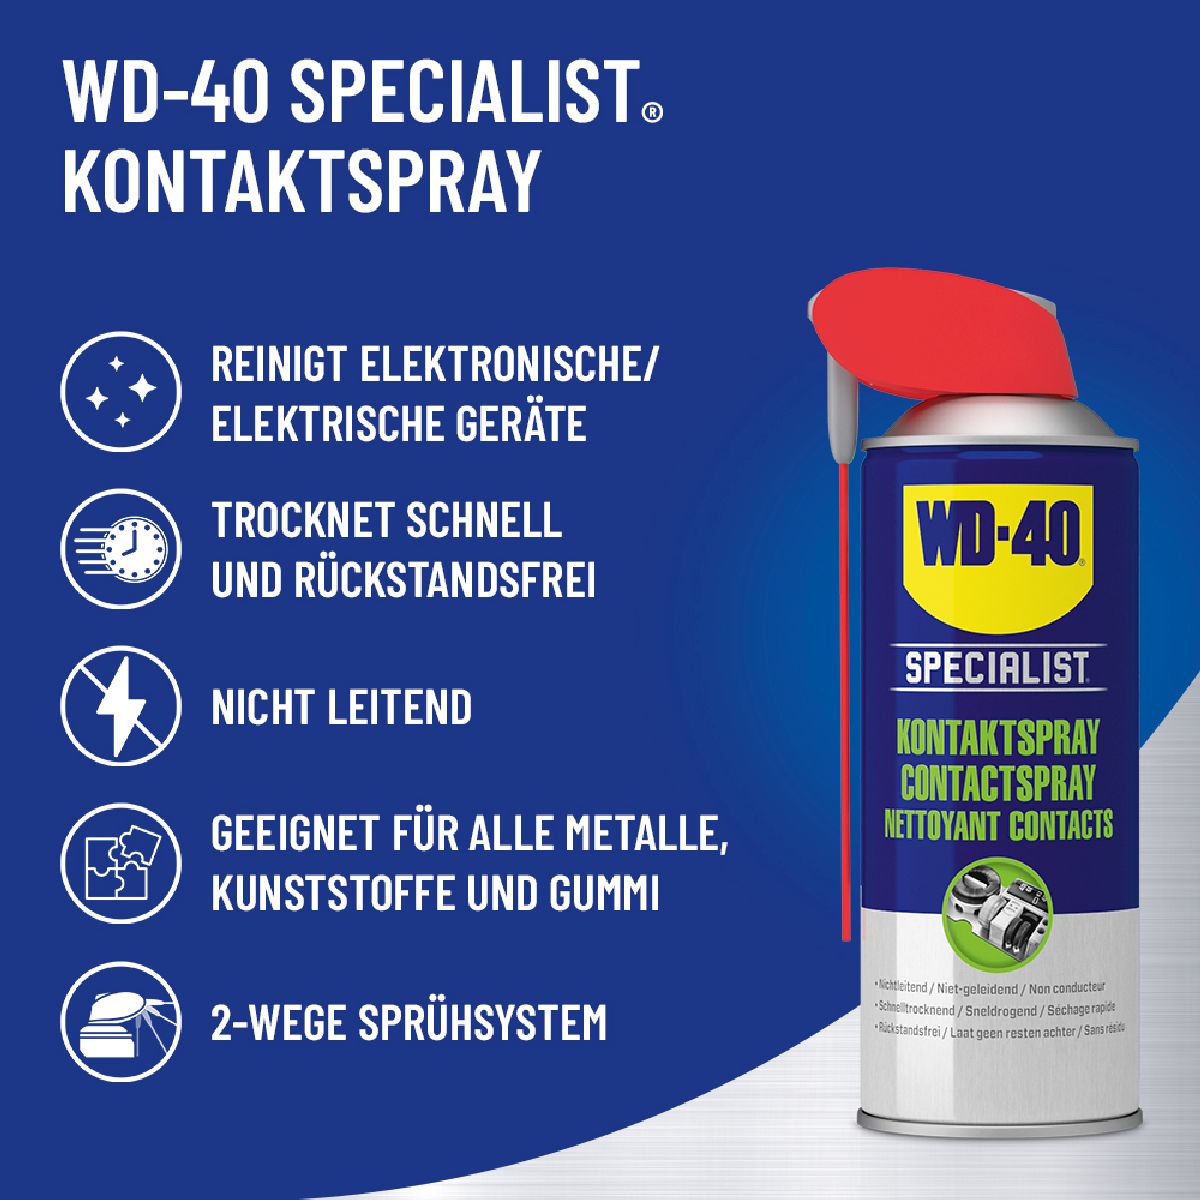 Nettoyant Contact WD-40 Specialist 400ml